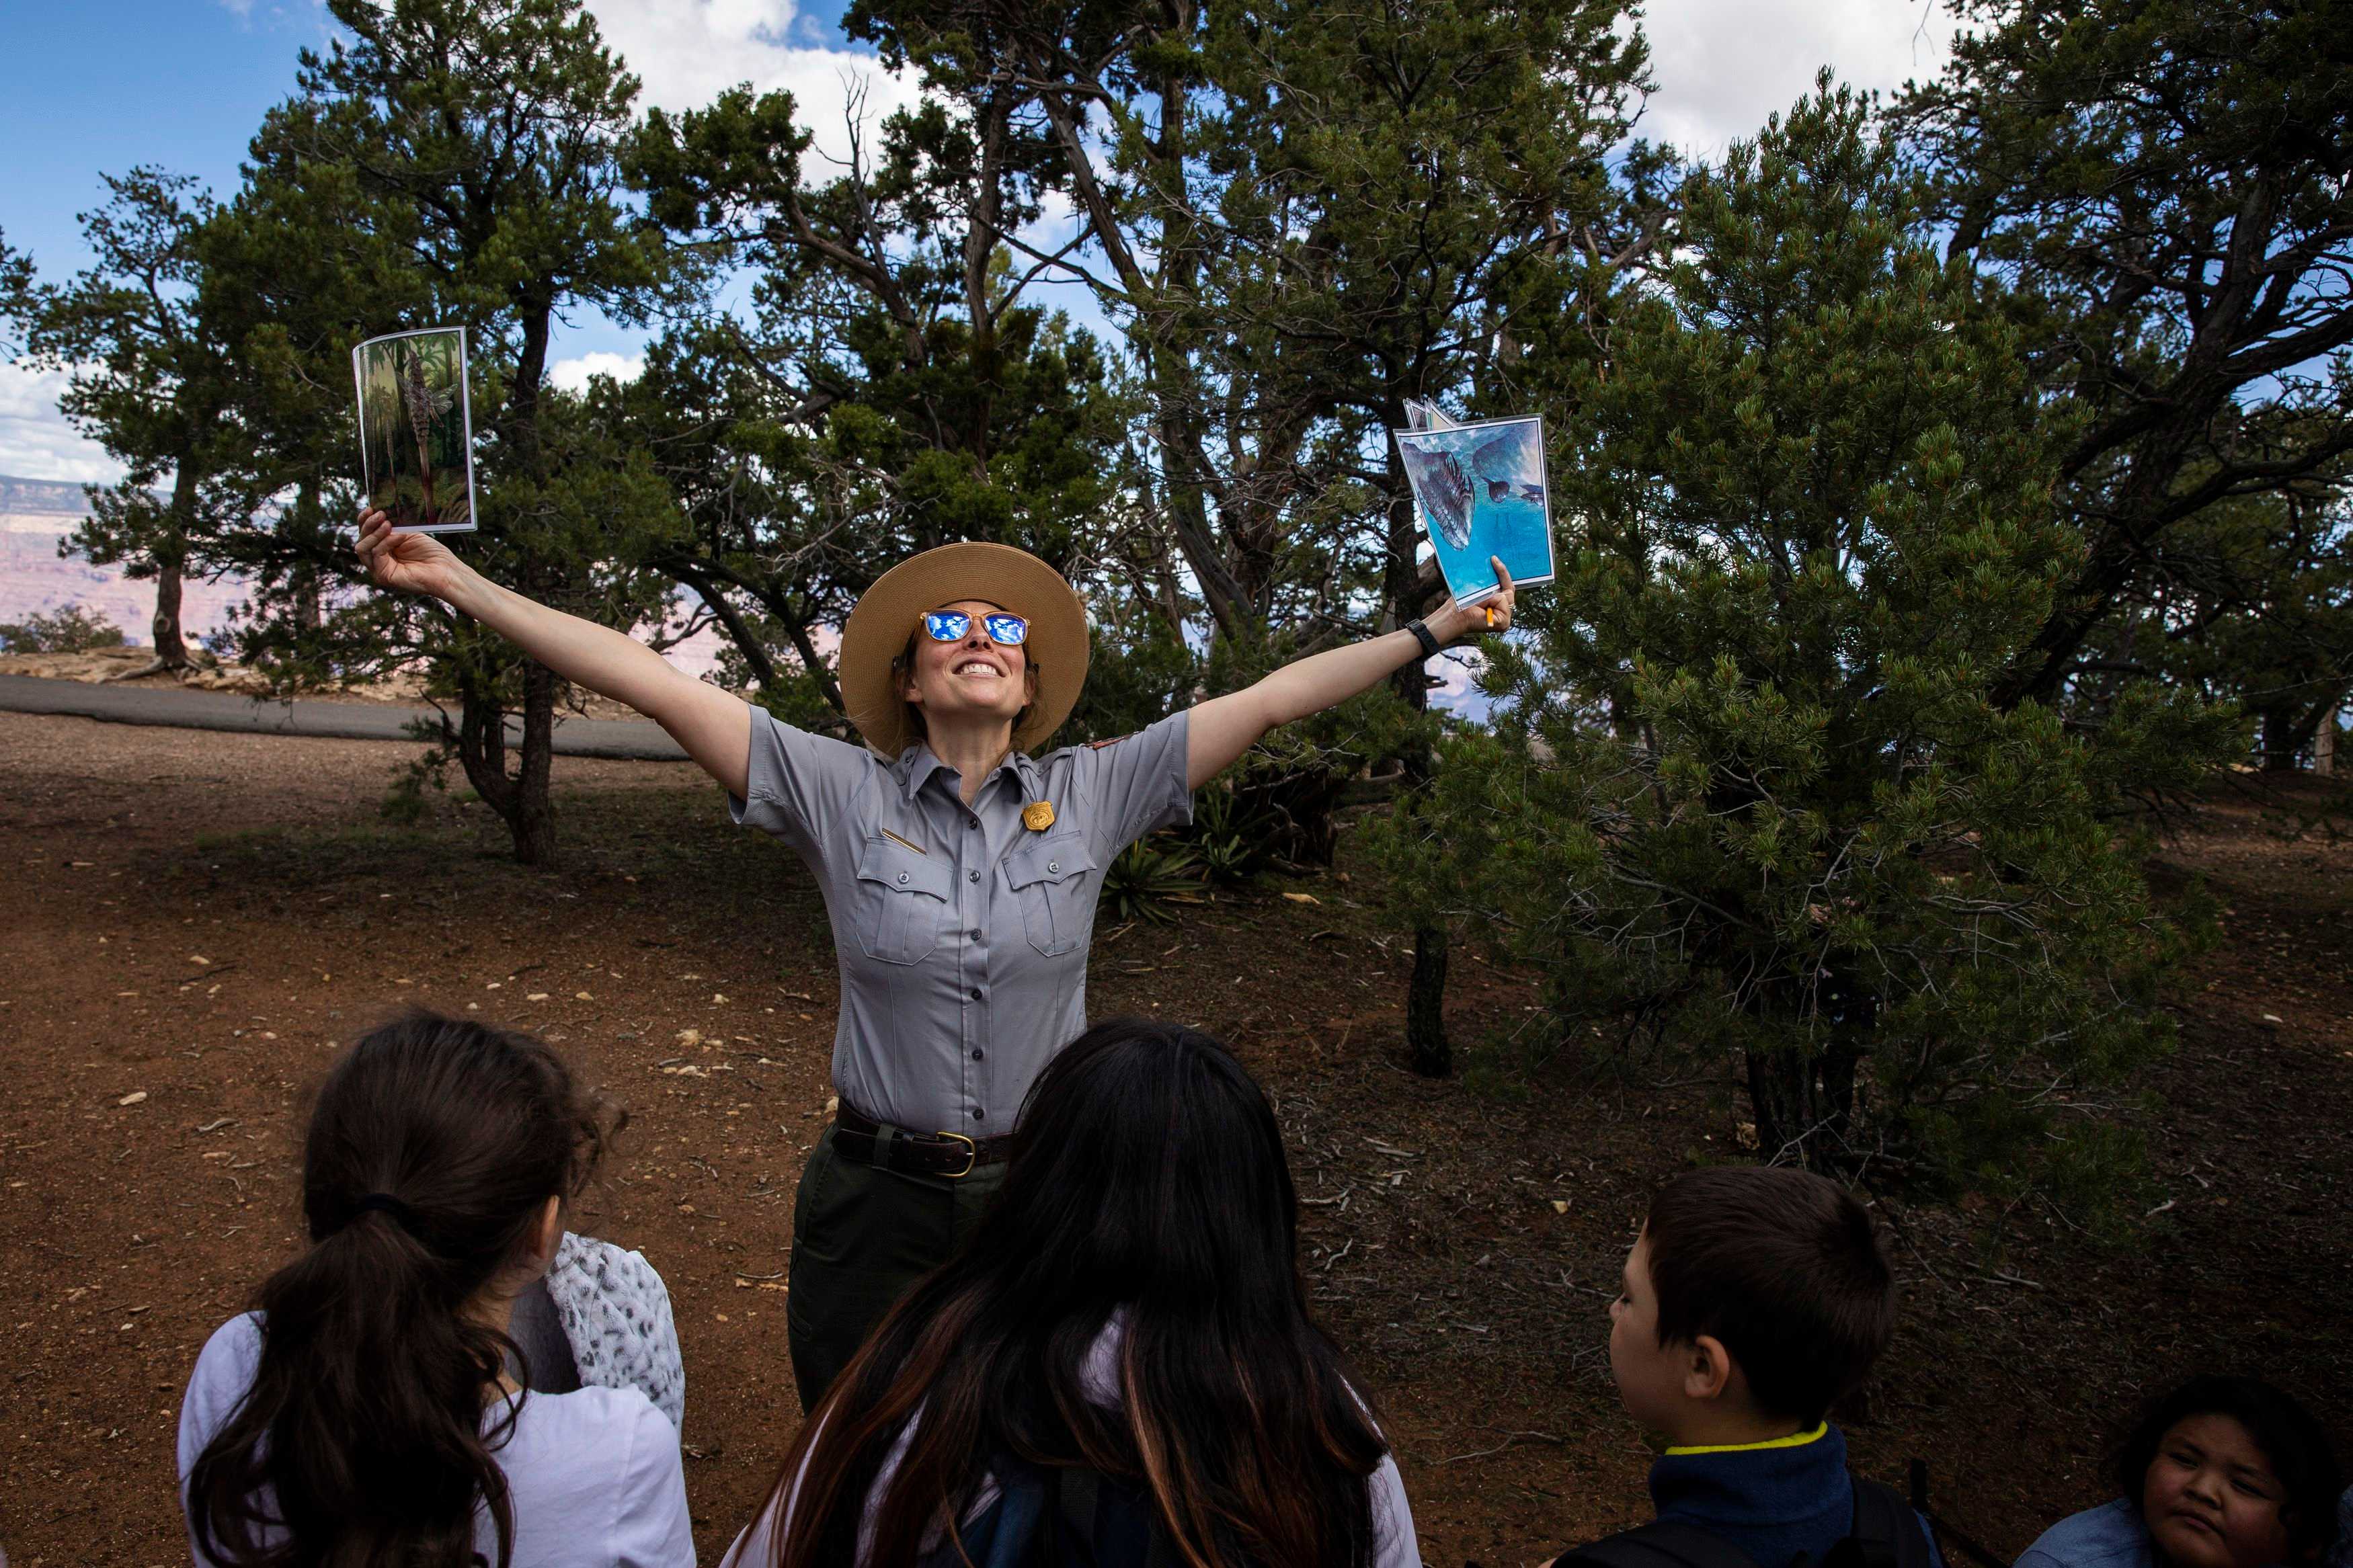 A Grand Canyon National Park ranger guided a fourth-grade class in a lesson on rocks during a class on the rim of the Grand Canyon. The students attend the Grand Canyon School District, which serves just over 250 students across all its grades and is the only school district that is located inside a national park.